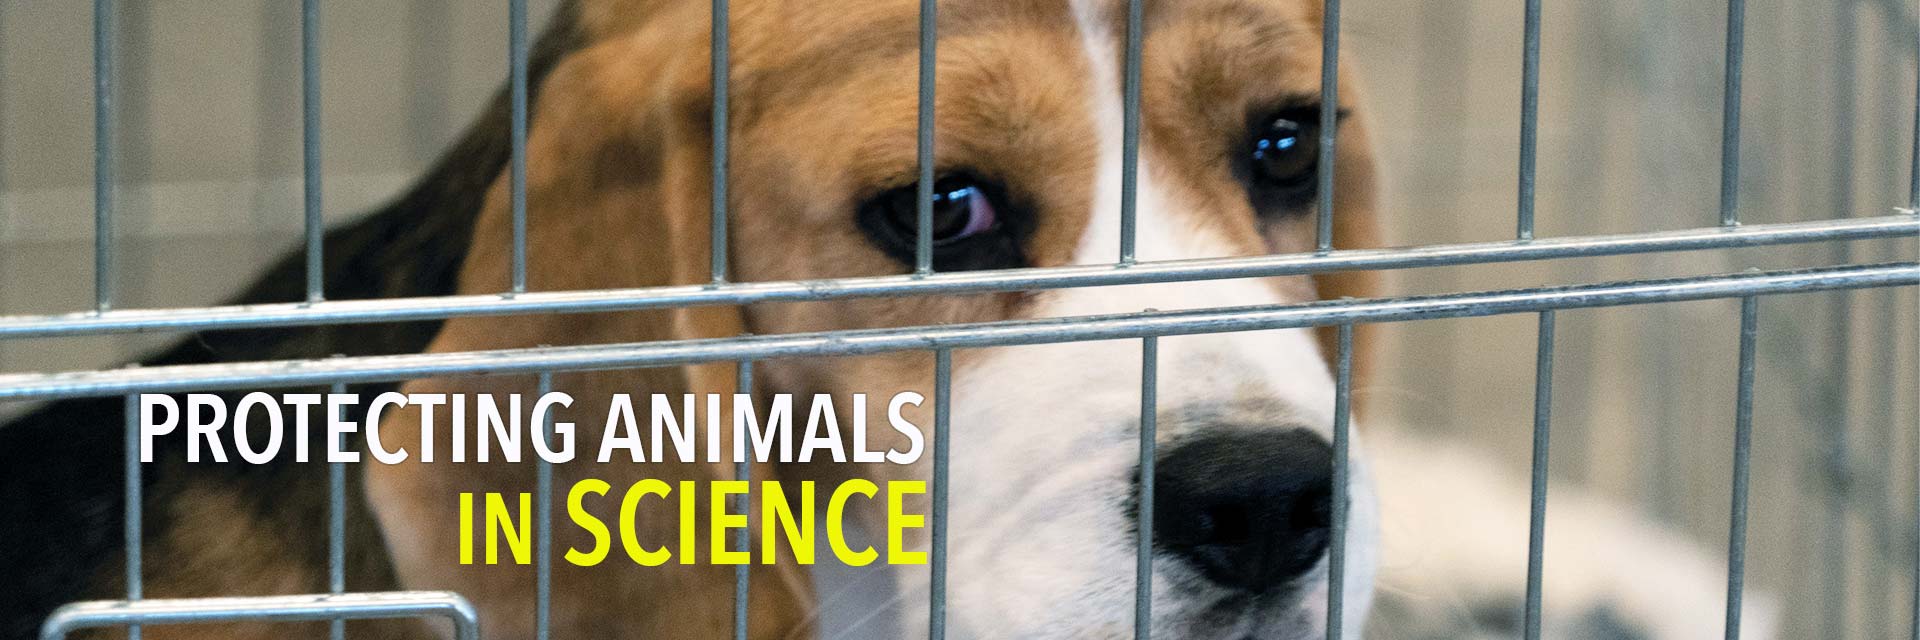 Protecting Animals in Science